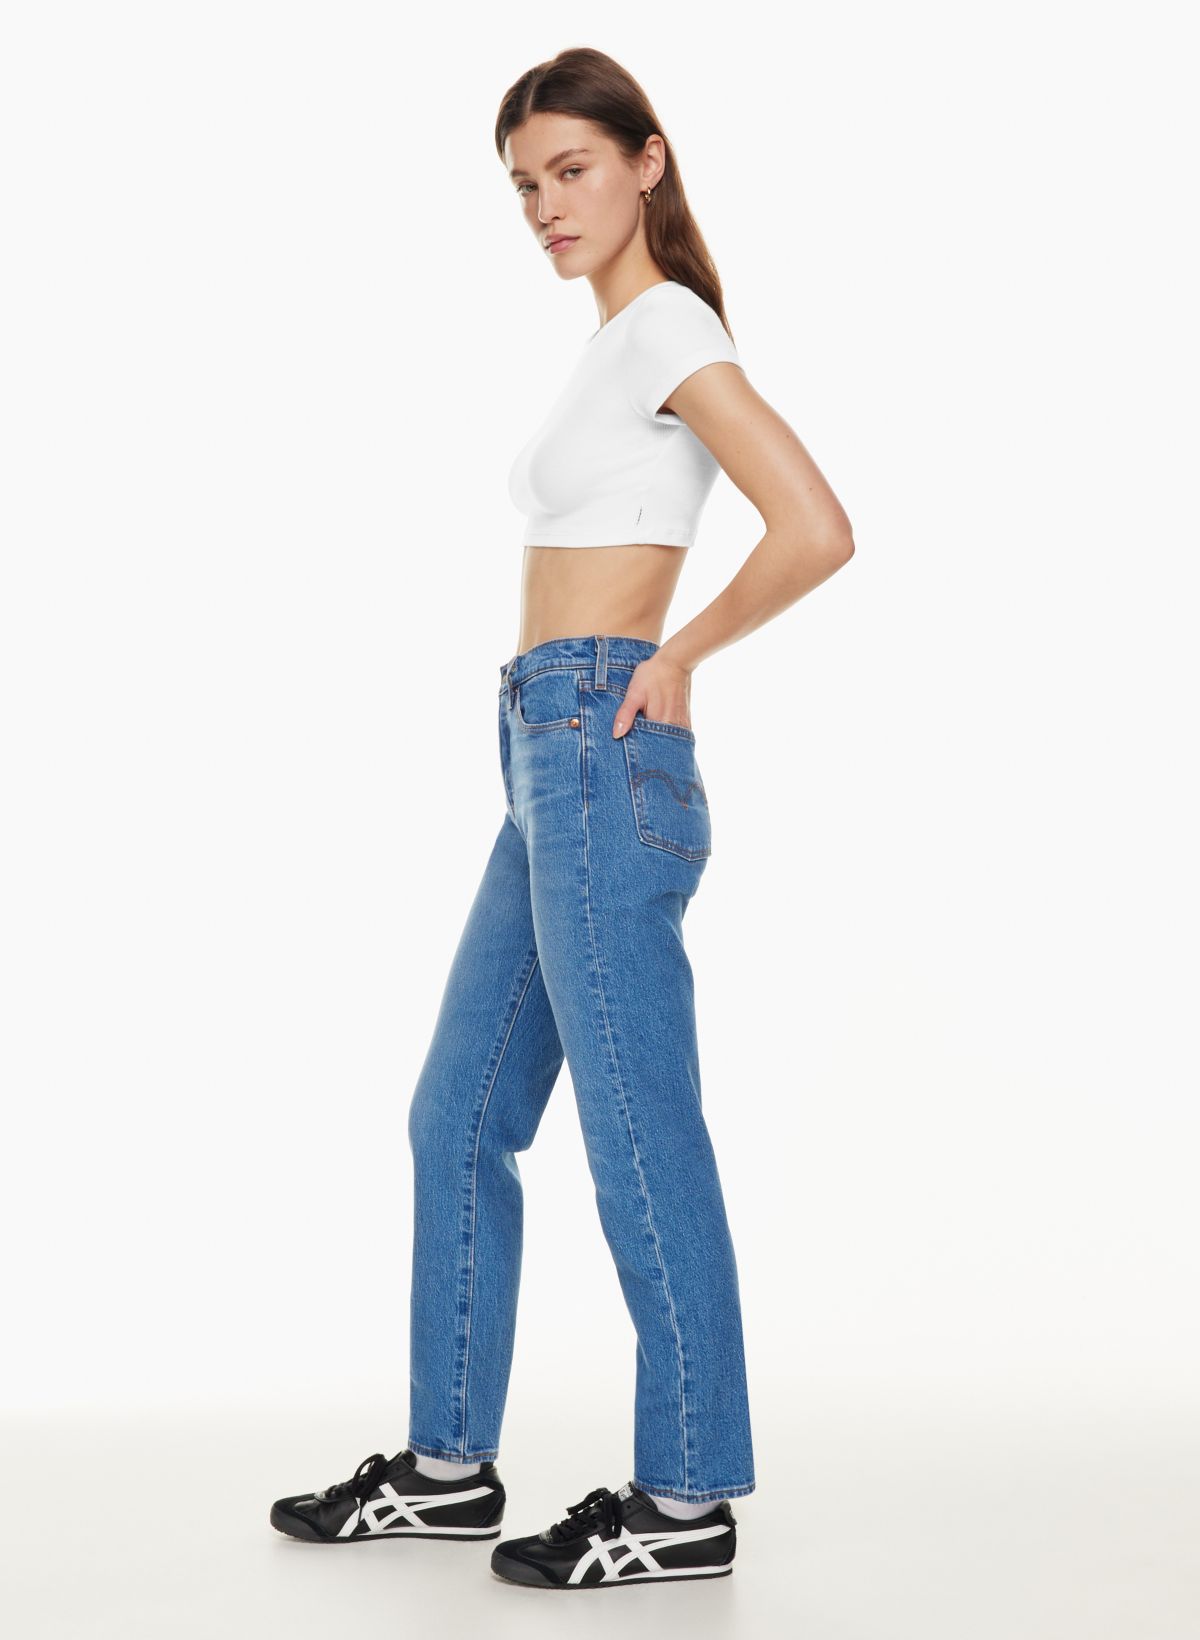 Pre-Loved, Levi's Wedgie Straight Fit Jeans